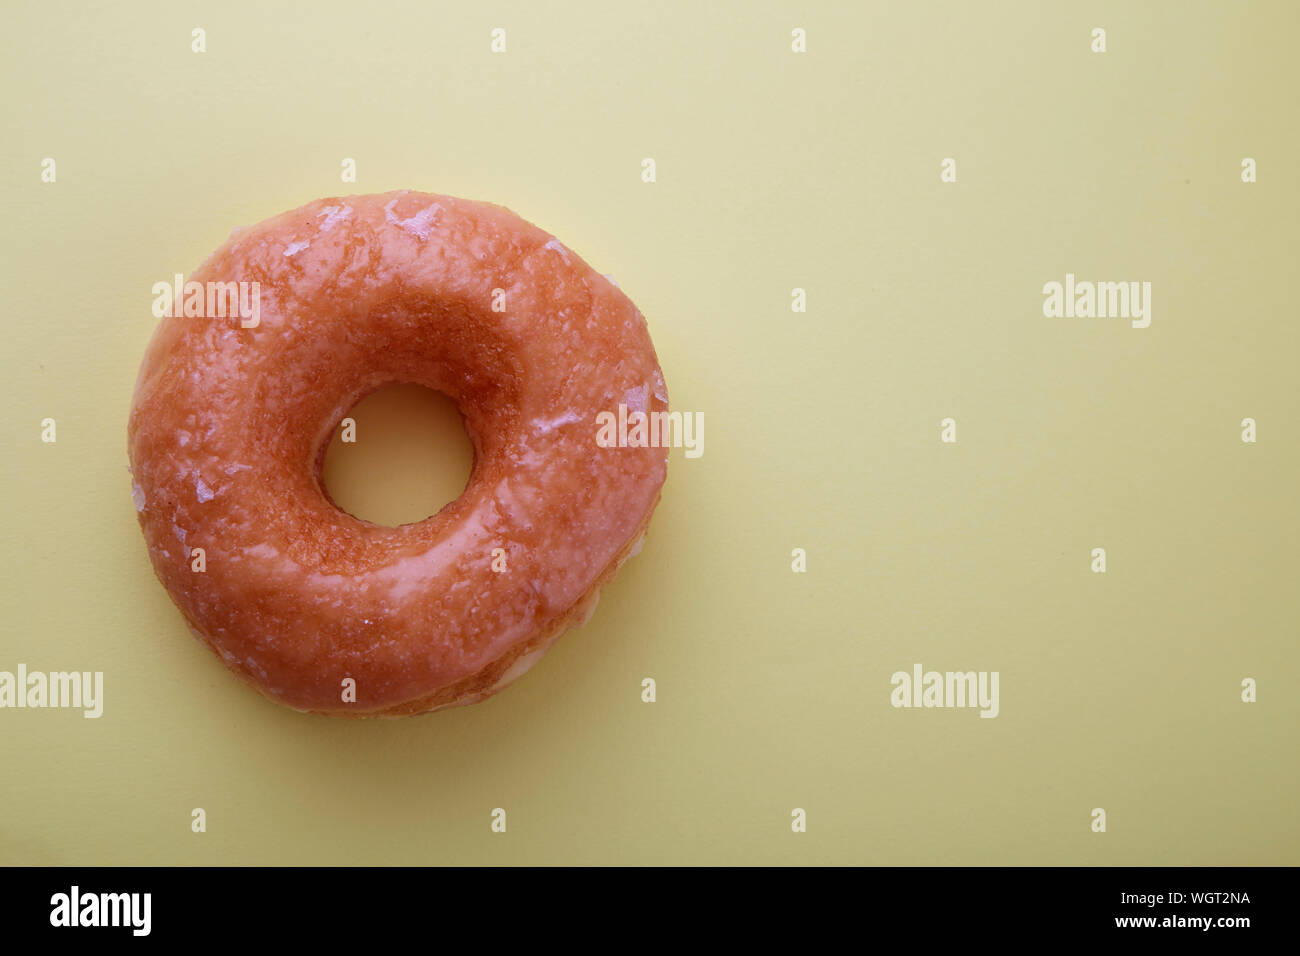 Close-up Of Donut Against Colored Background Stock Photo